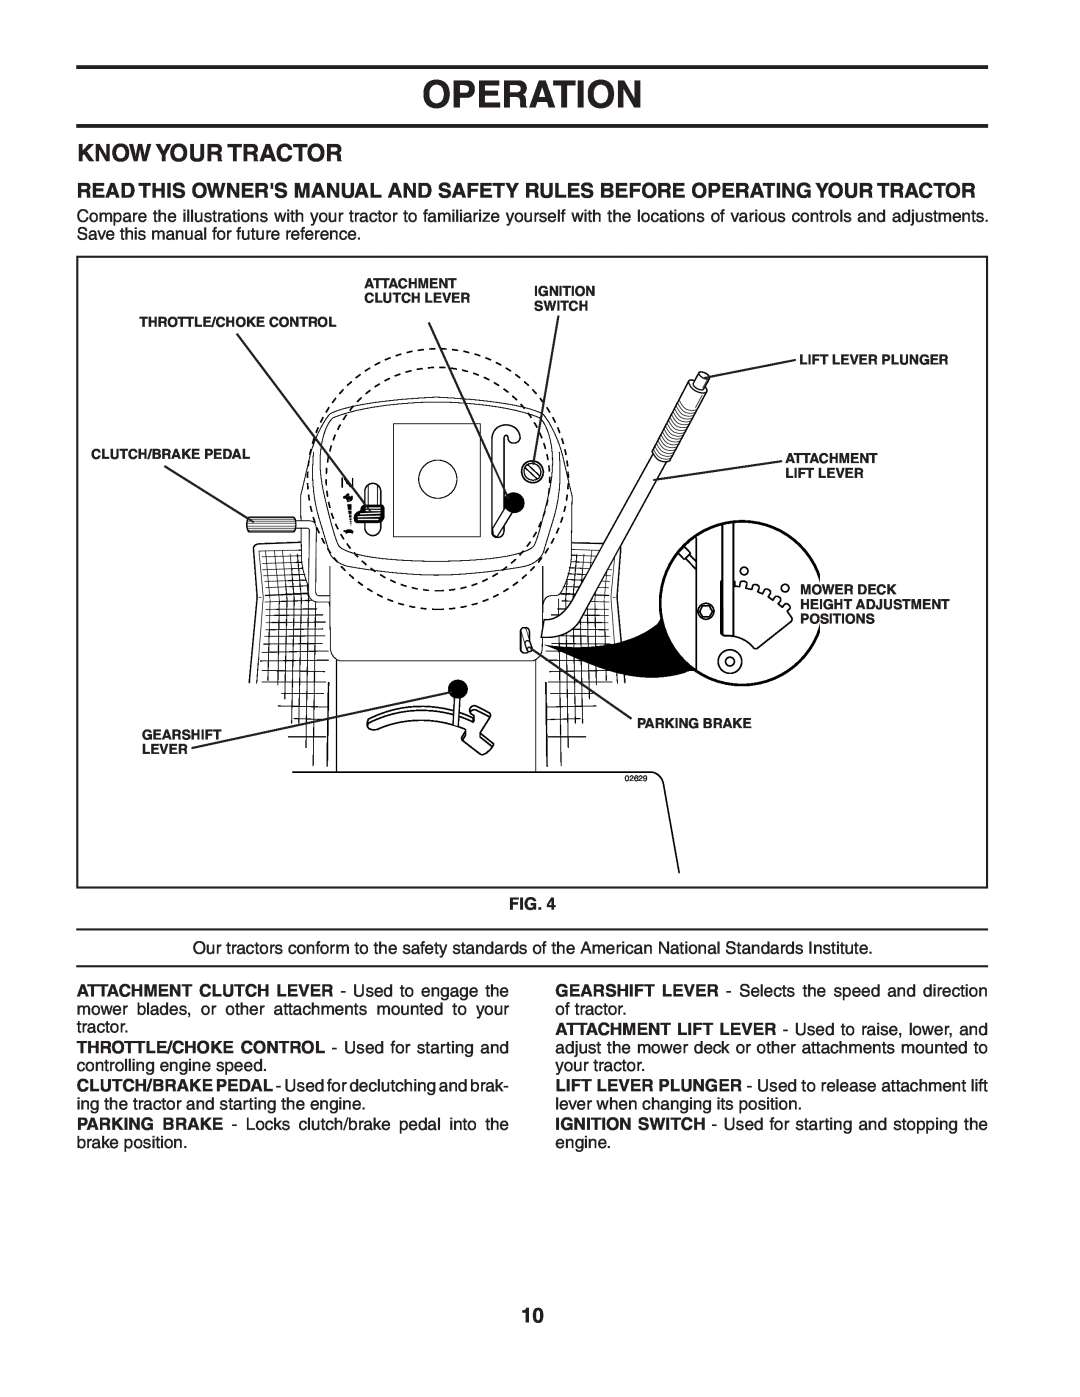 McCulloch MC1136B manual Know Your Tractor, Operation 